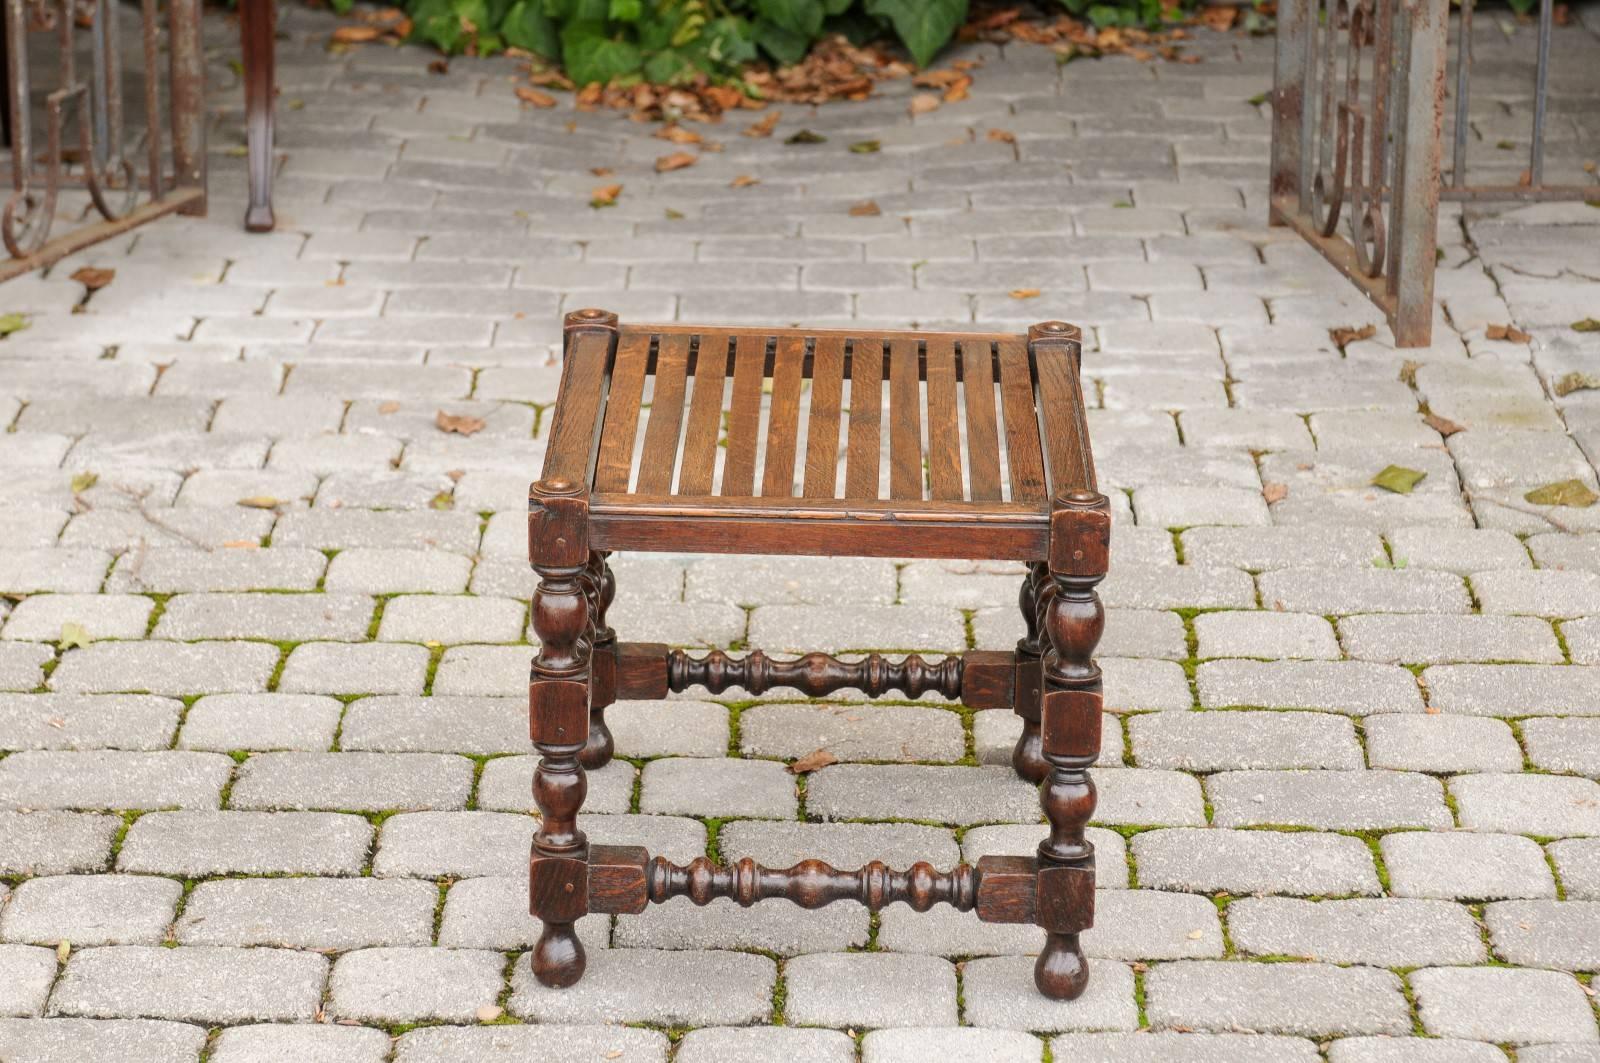 19th Century English 1880 Oak Barley Twist Stool with Slatted Seat, Turned Legs and Stretcher